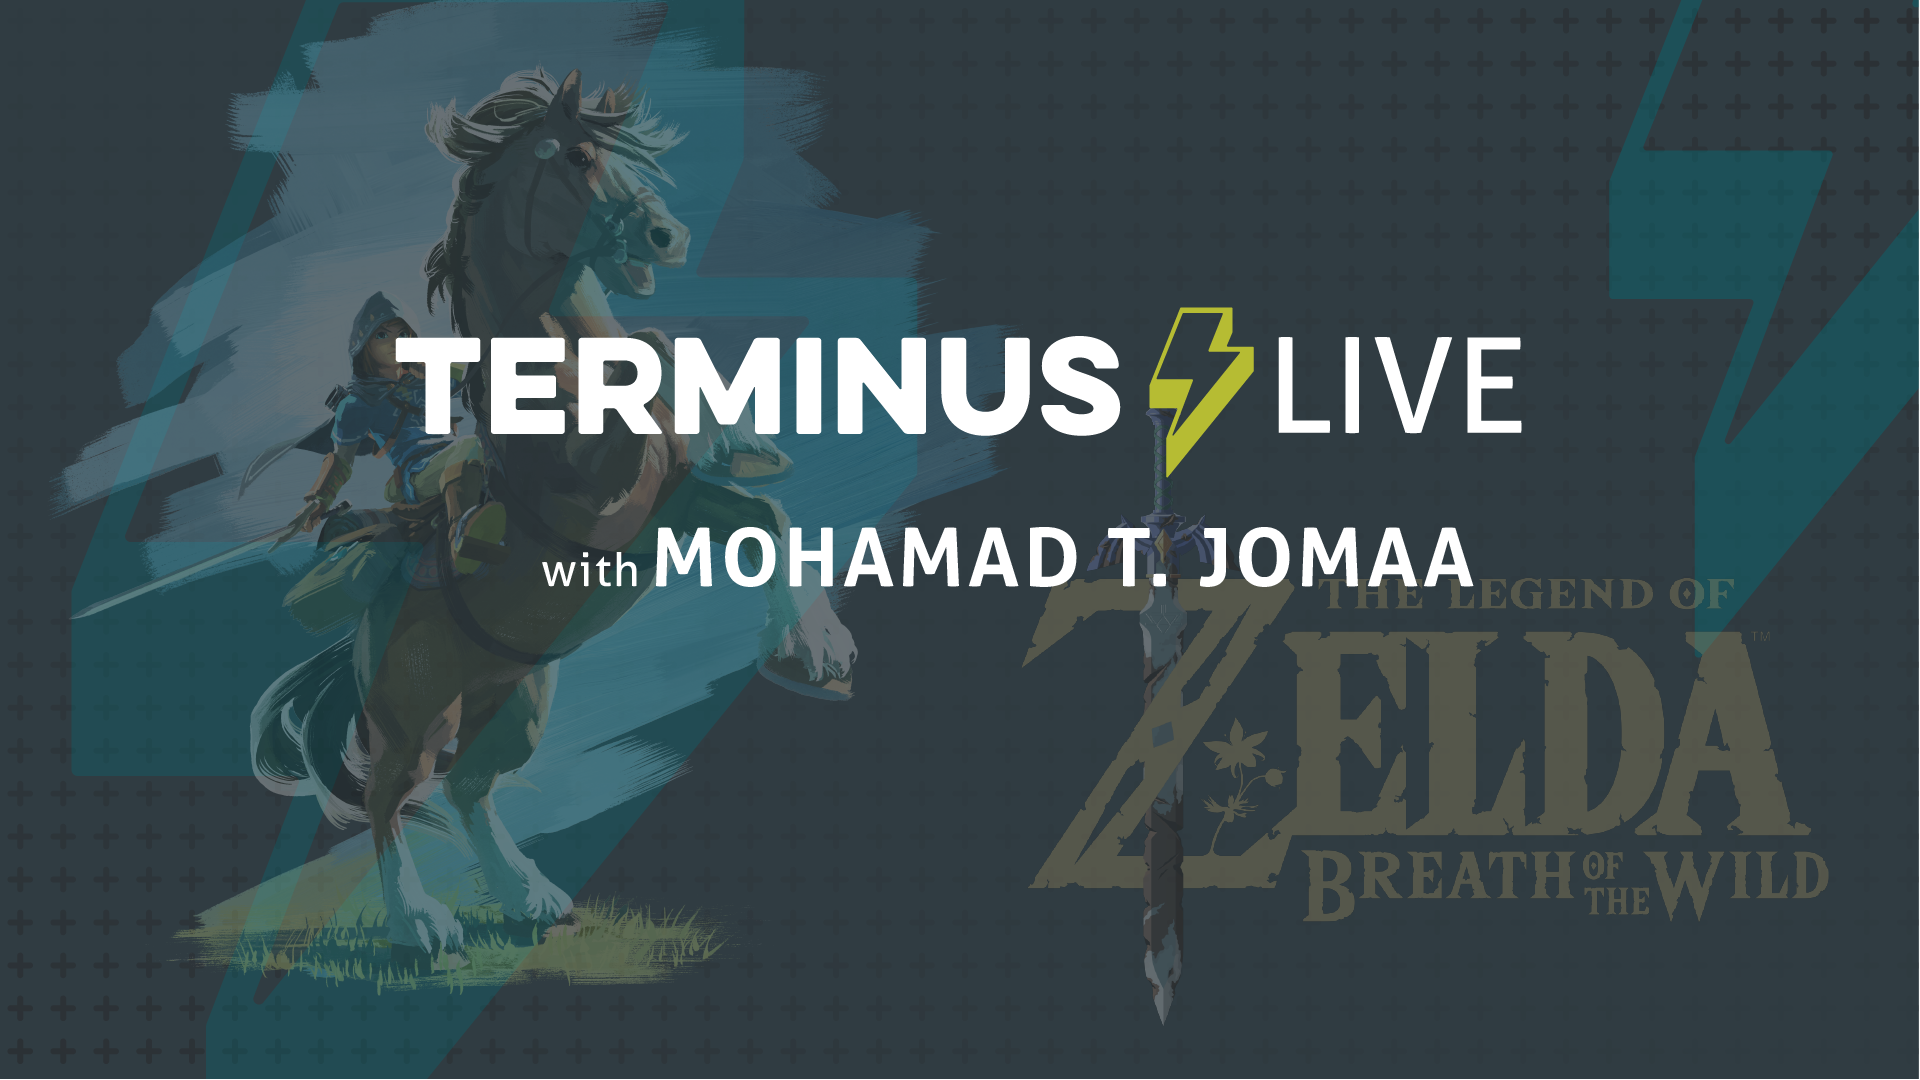 TERMINUS Live: Mohamad T. Jomaa plays Breath of the Wild